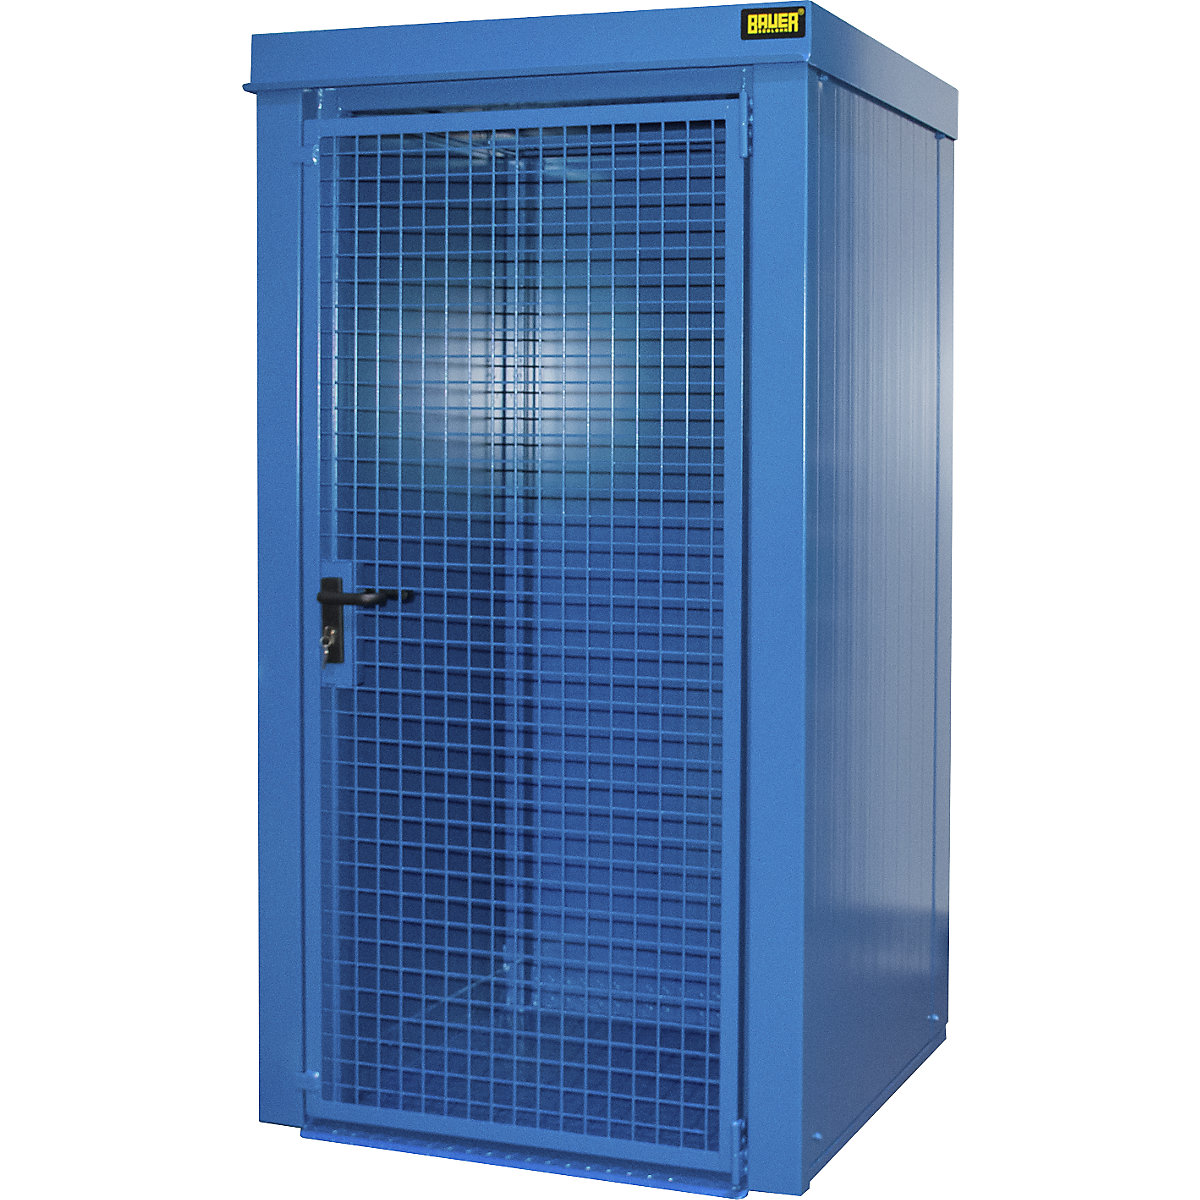 Gas cylinder container, fire resistant – eurokraft pro, for 9 cylinders with Ø 230 mm, blue-3